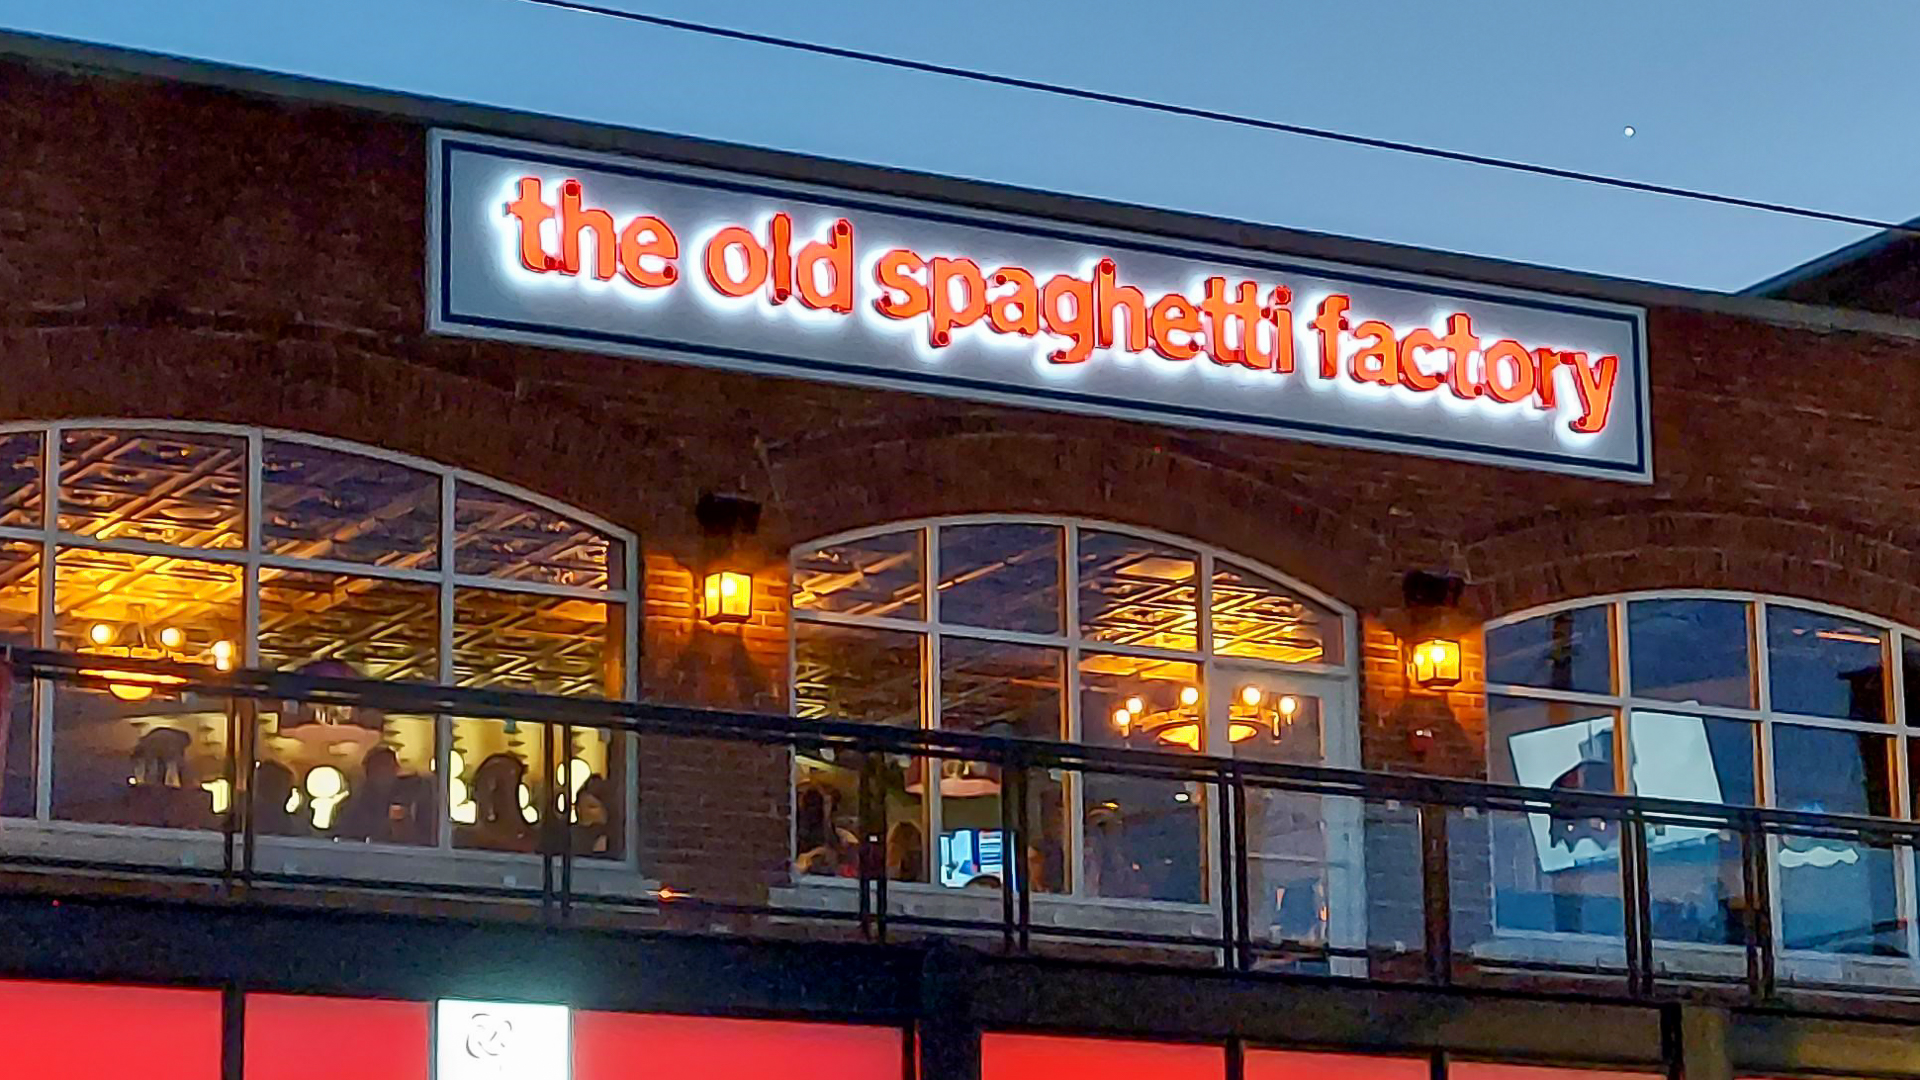 The Old Spaghetti Factory Sign Produced by Luminous Neon, Inc.